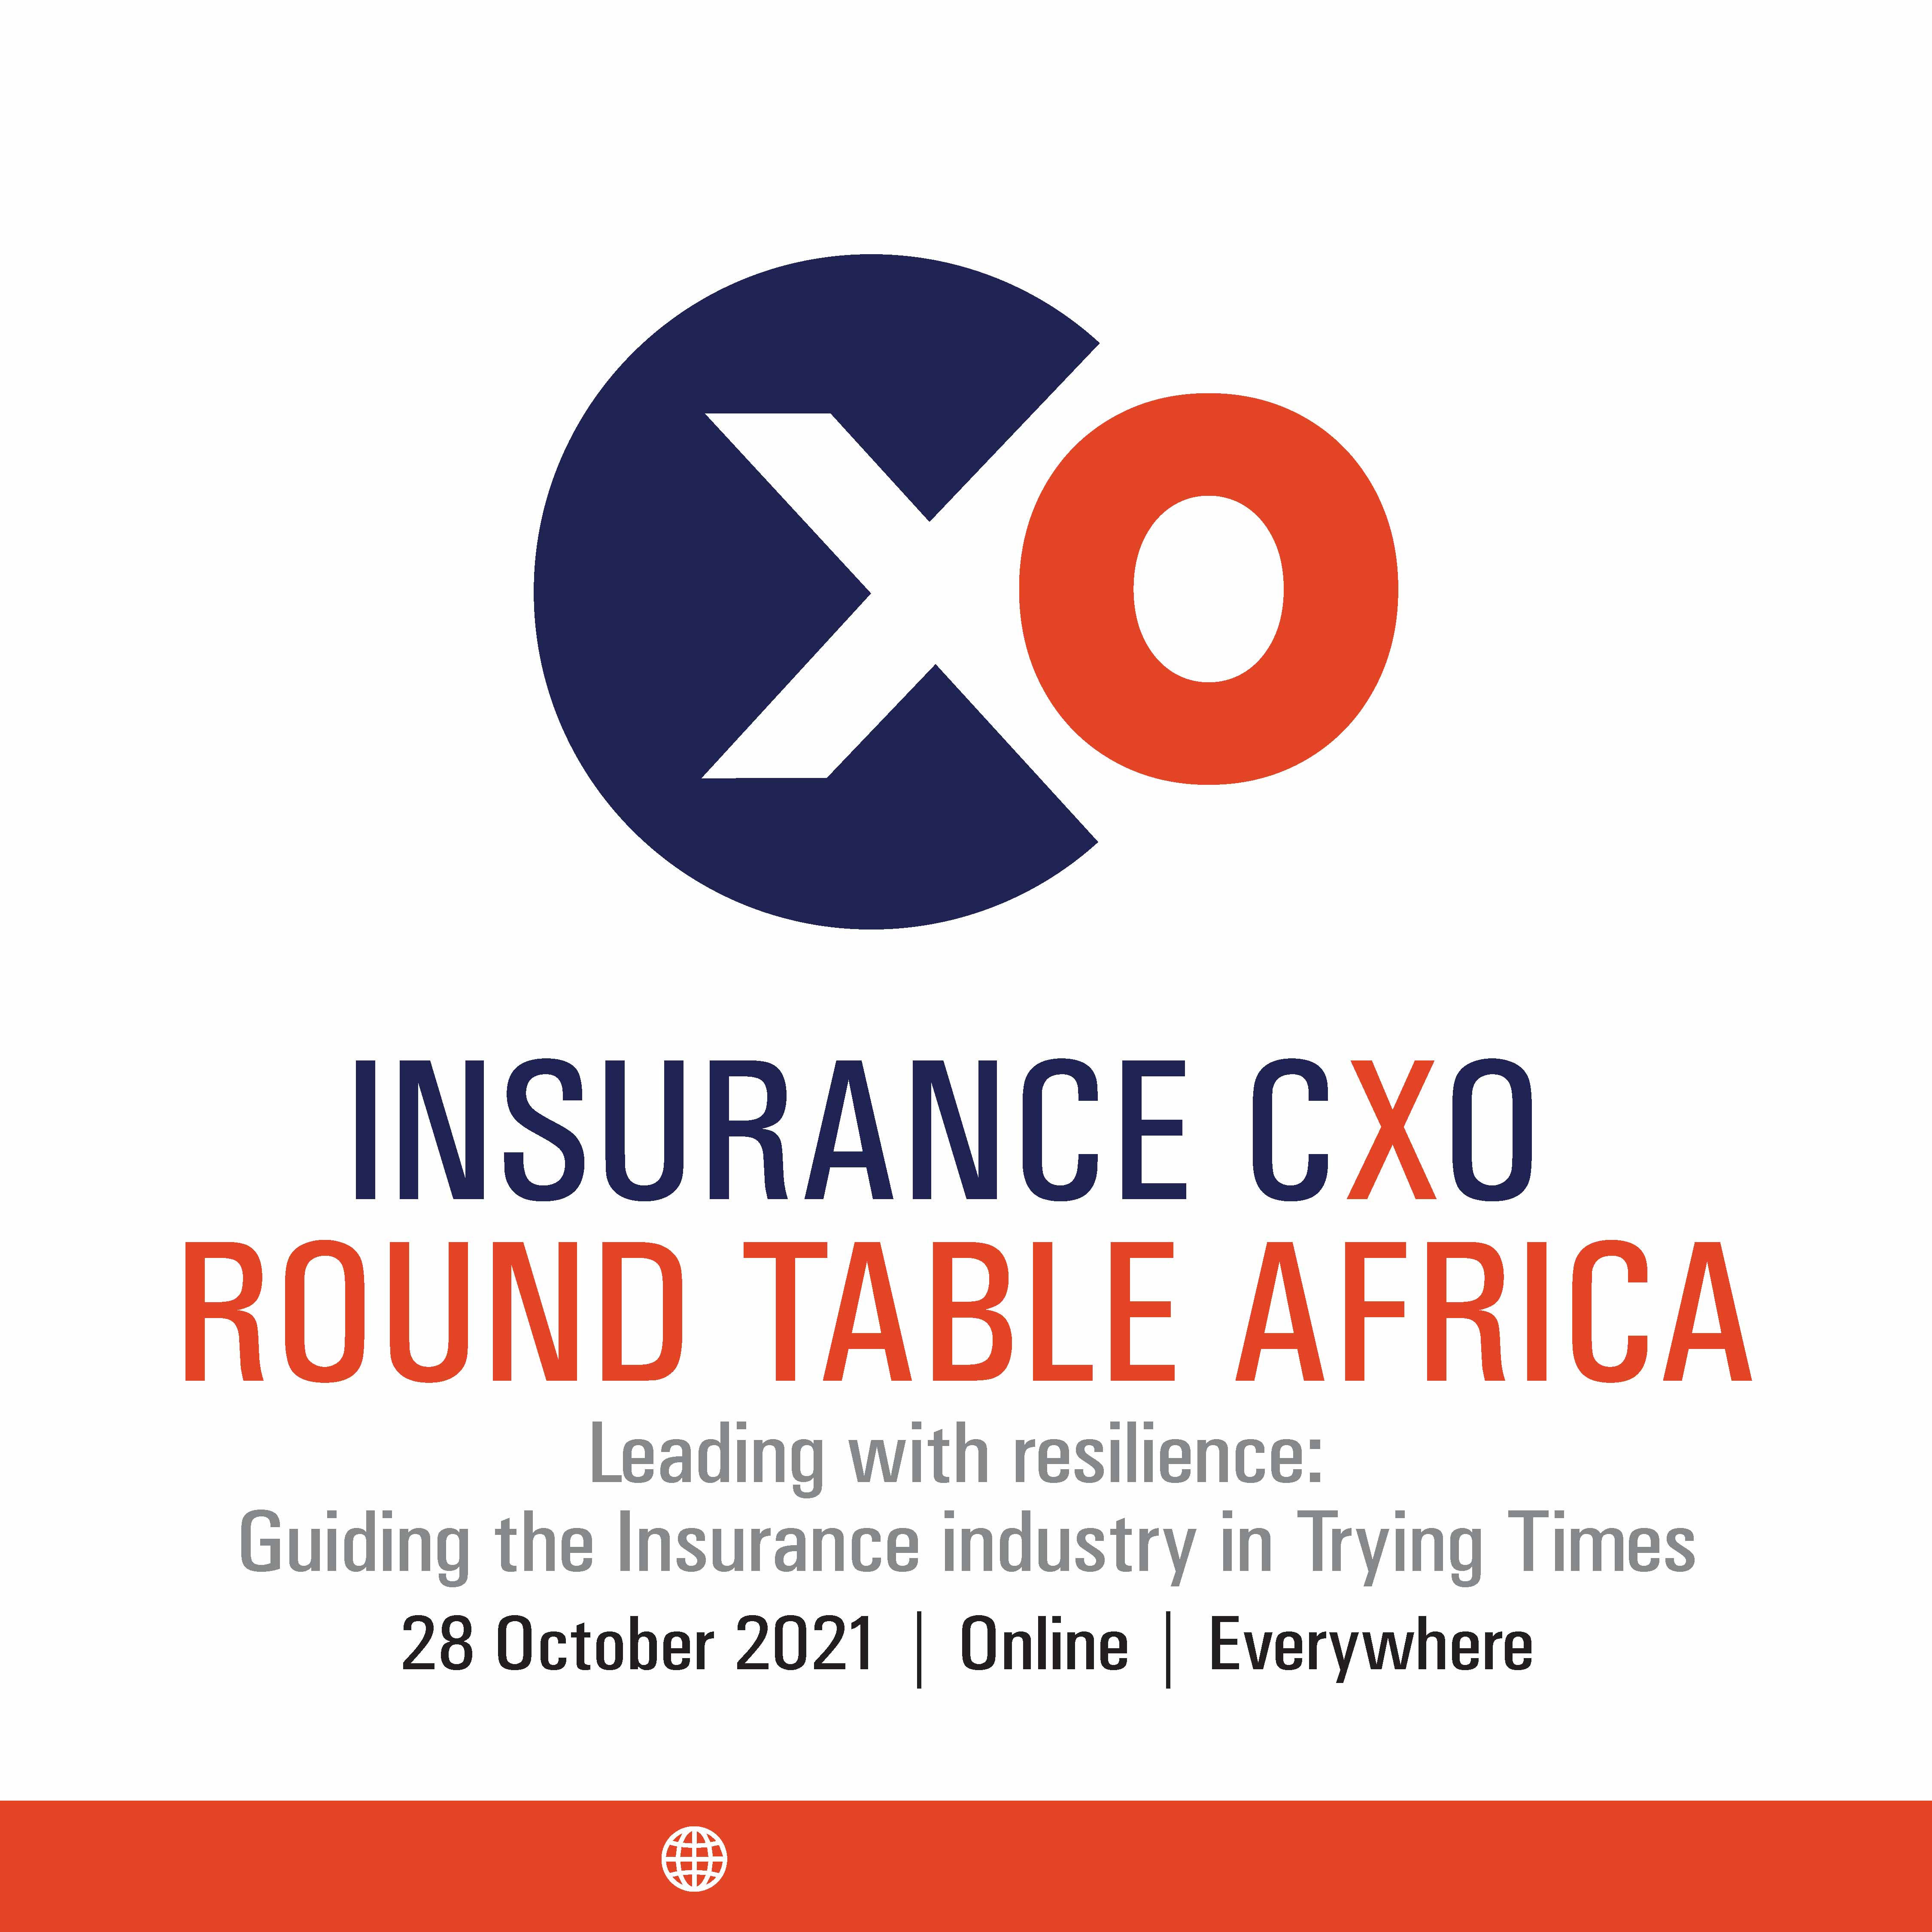 Insurance CXO Round Table Africa organized by Fextons